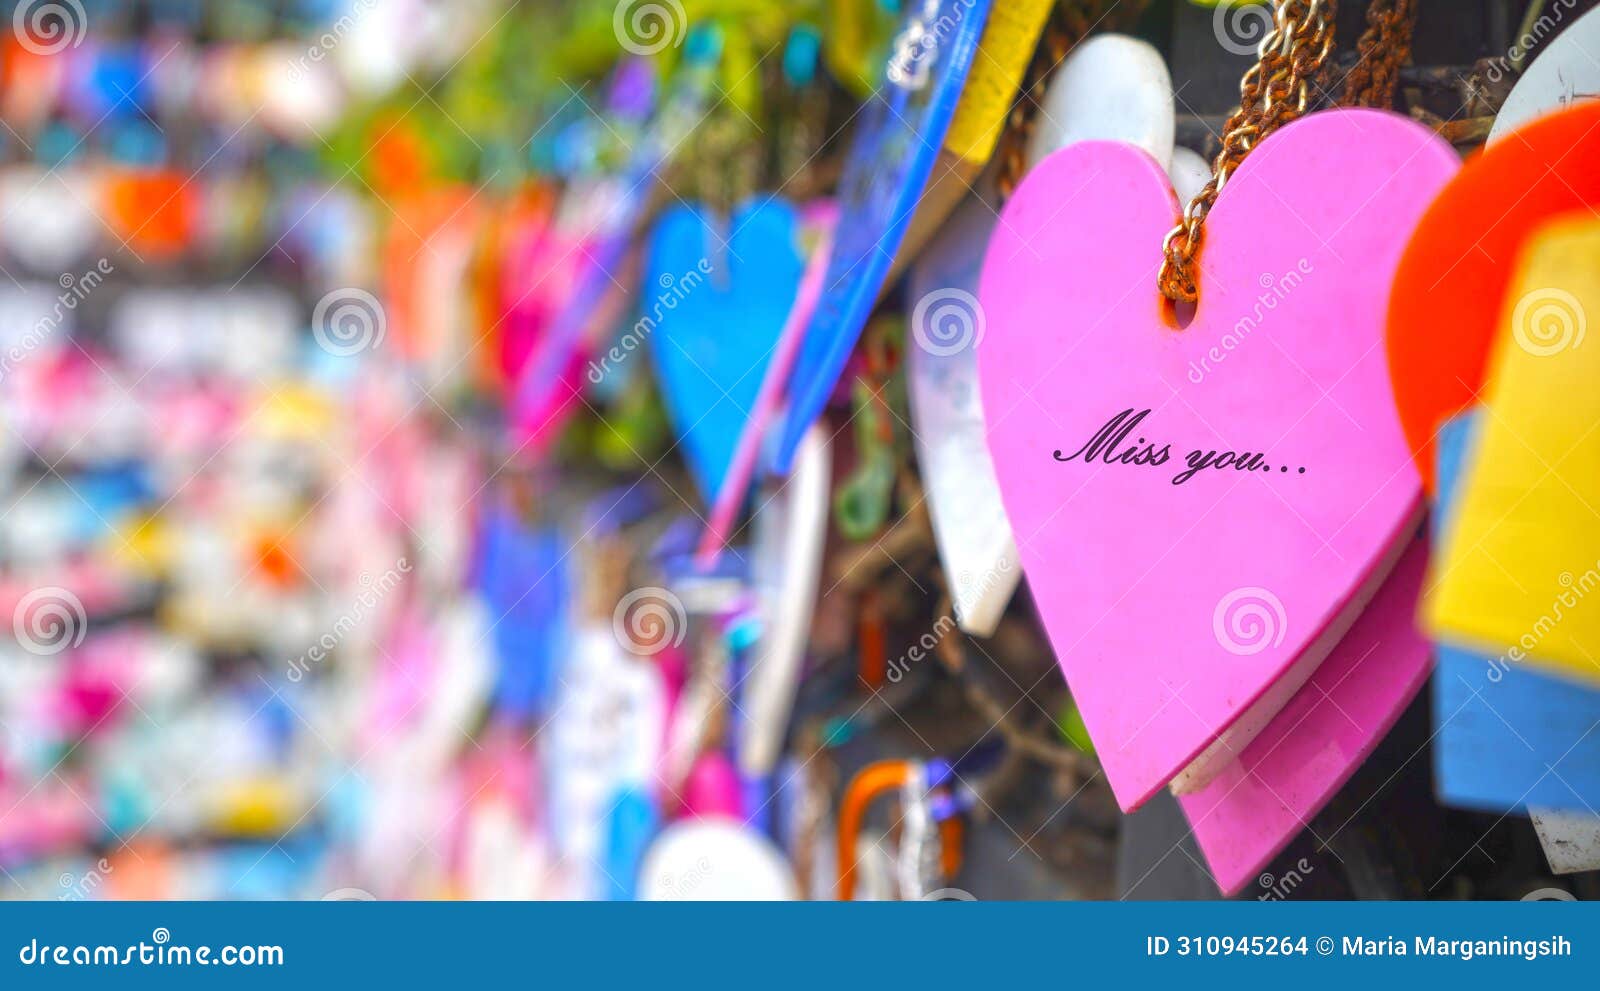 colorful hearts on the street hanging on wall with random love text messages - miss you